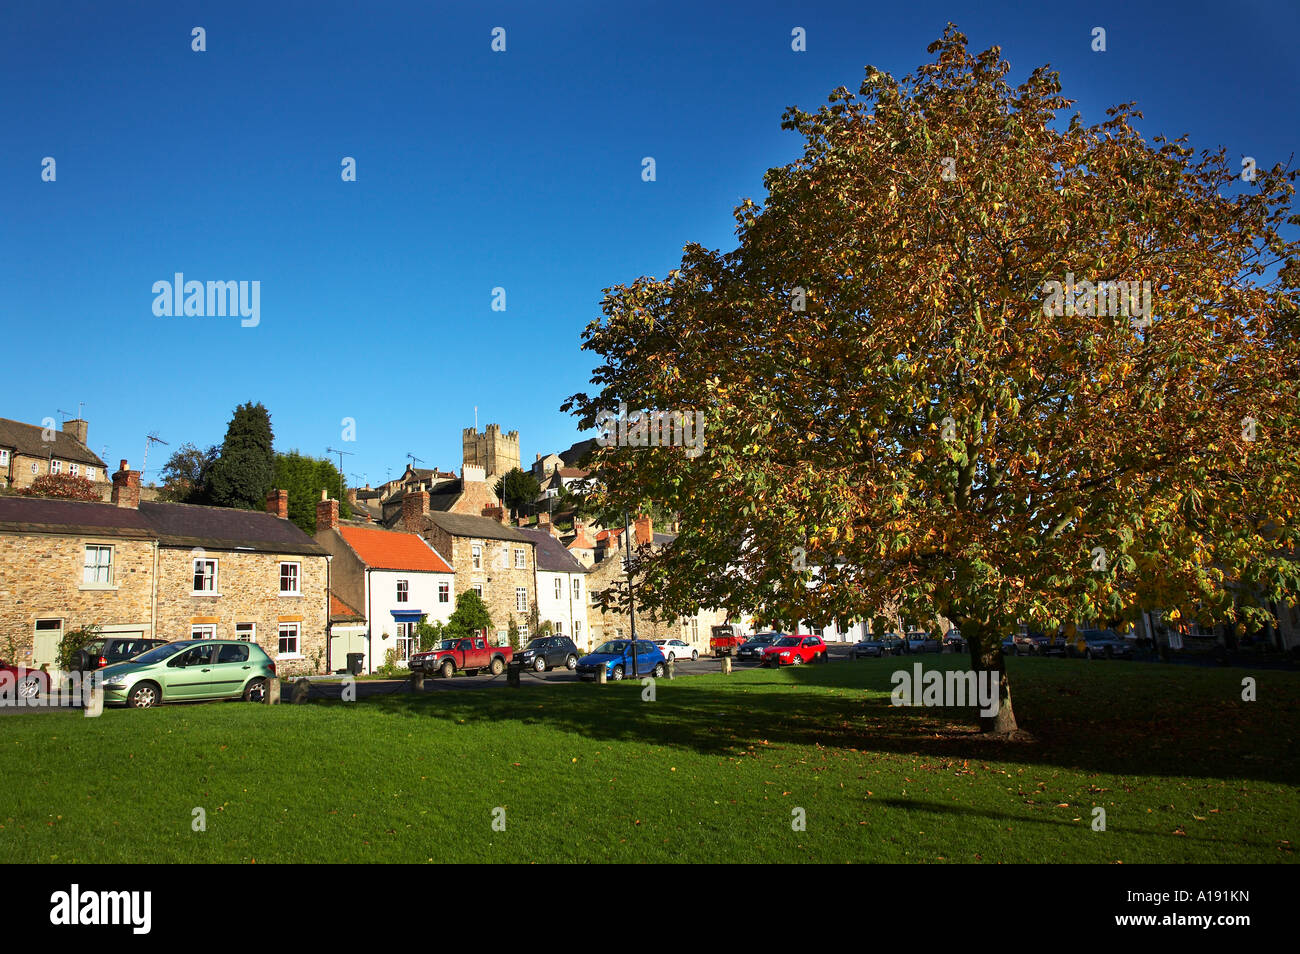 Le Green Richmond North Yorkshire Angleterre Banque D'Images